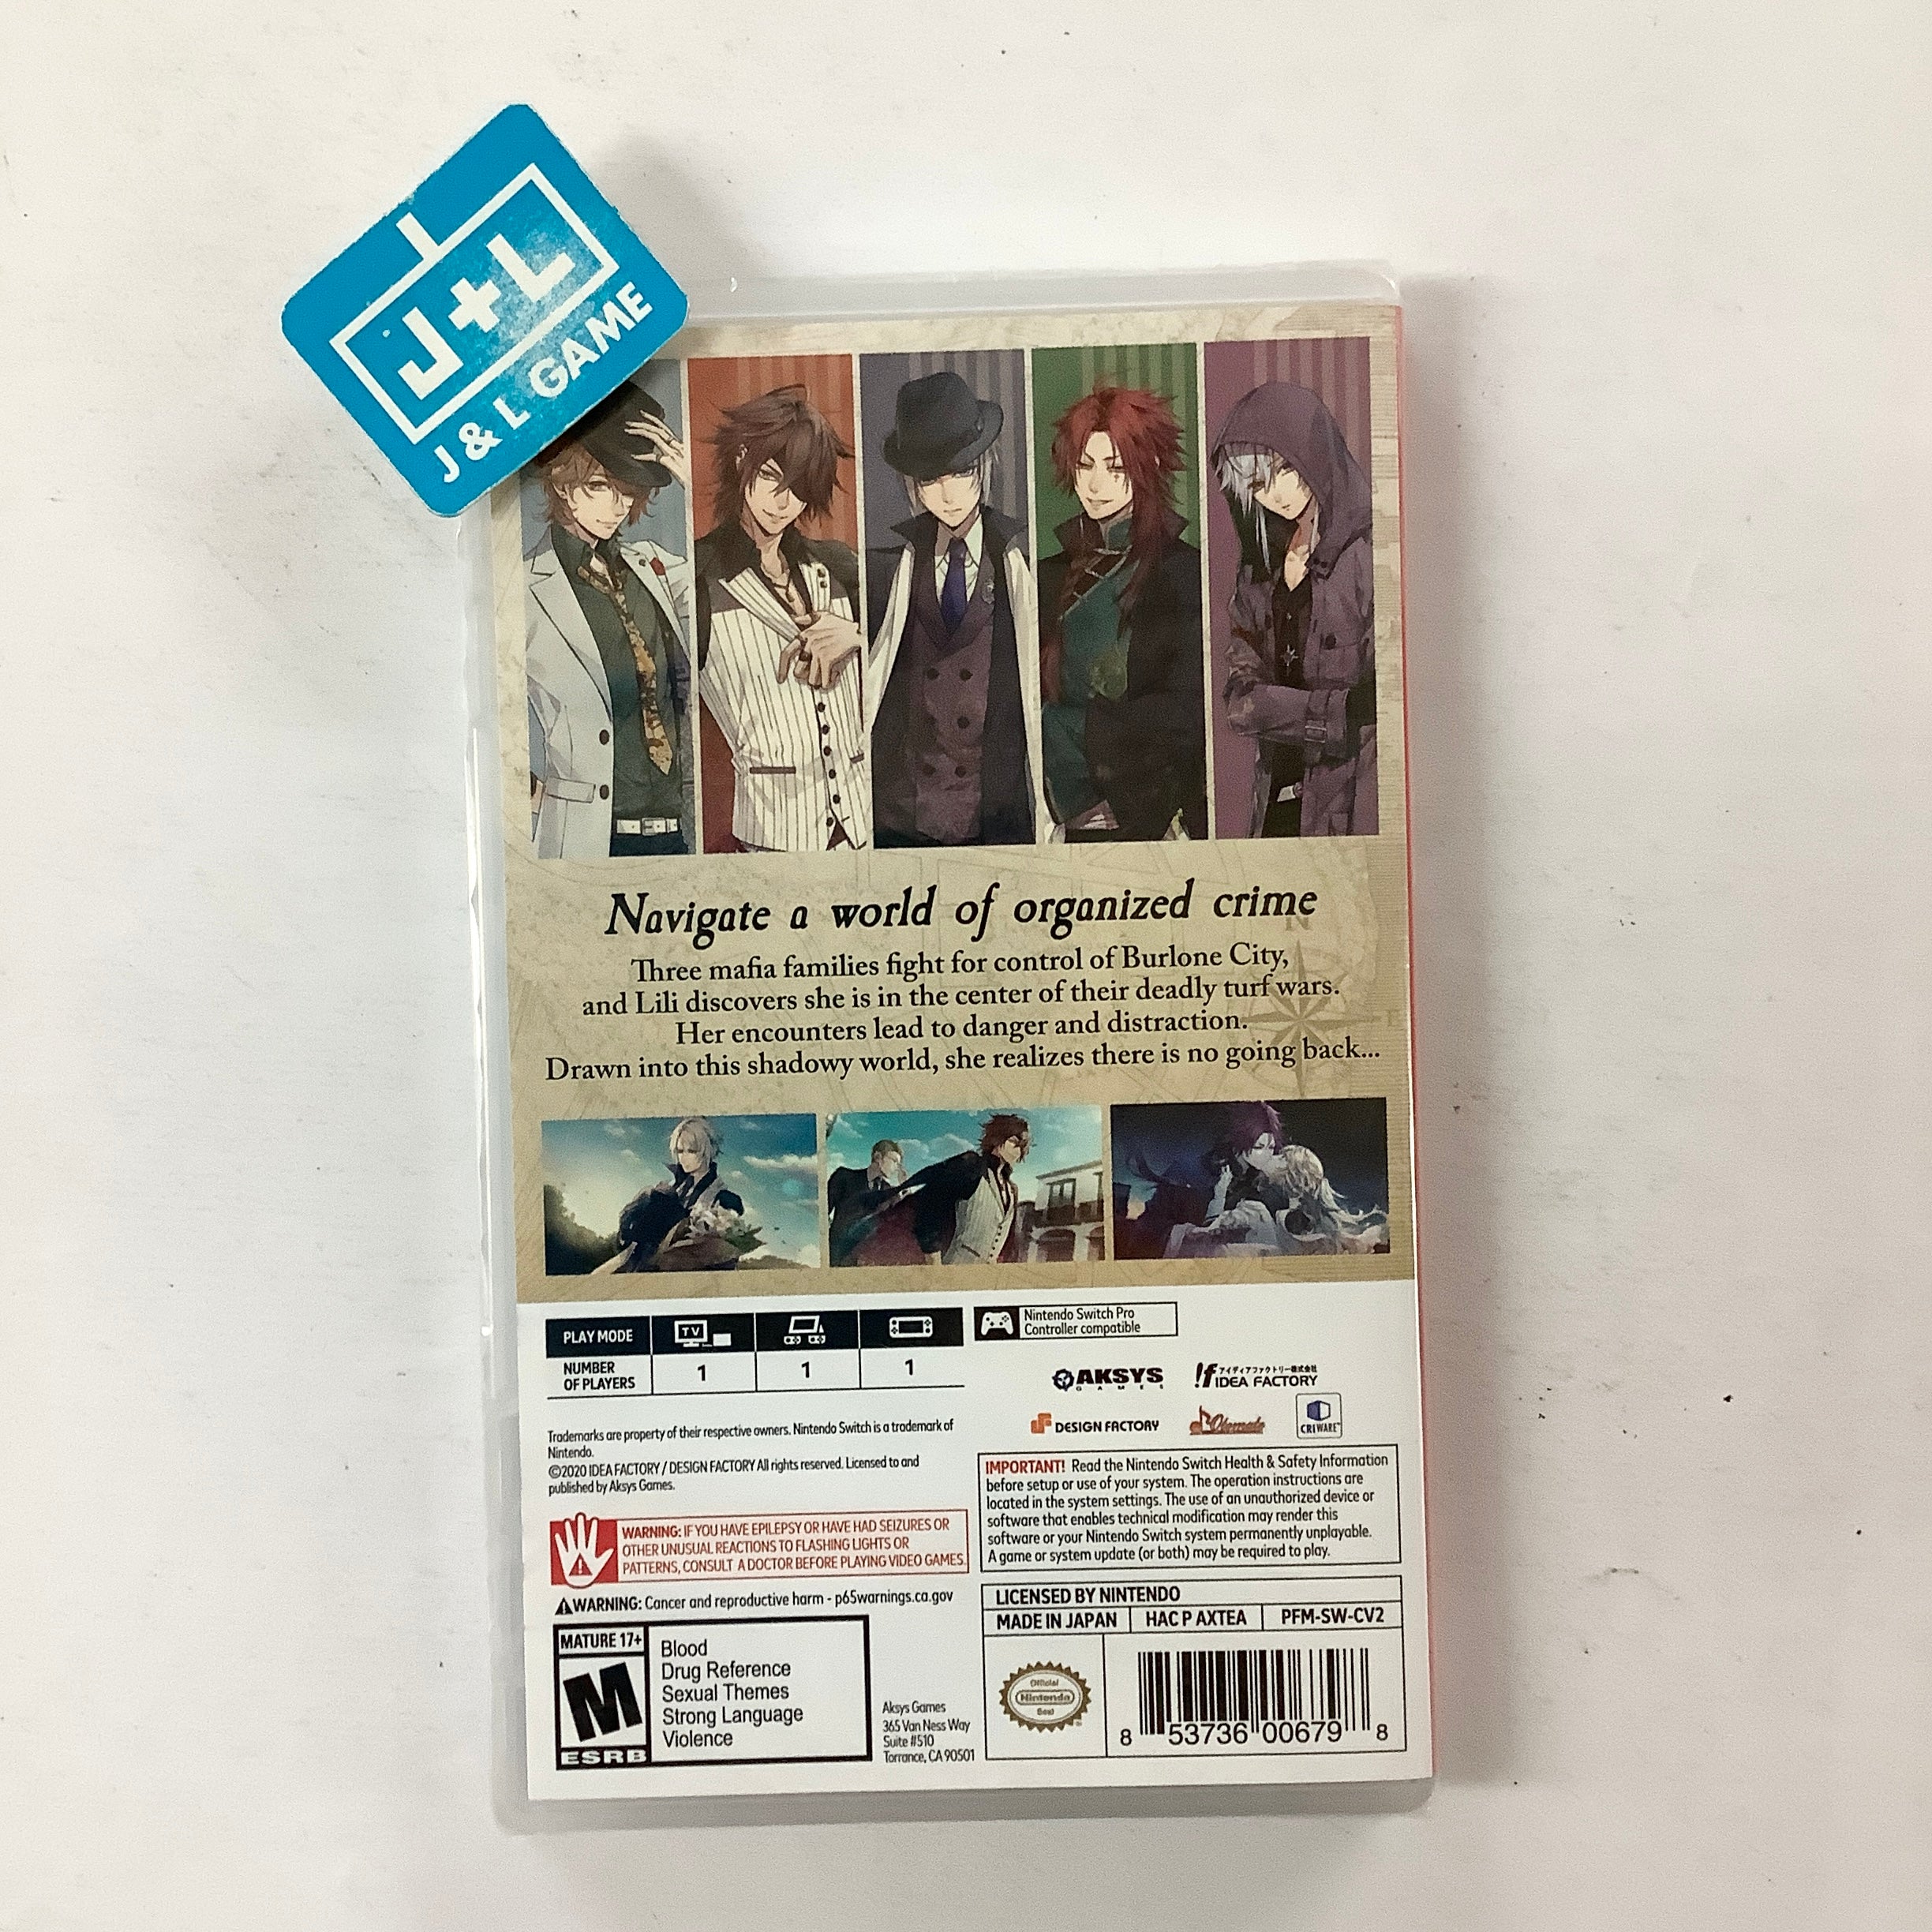 Piofiore: Fated Memories - (NSW) Nintendo Switch Video Games Aksys Games   